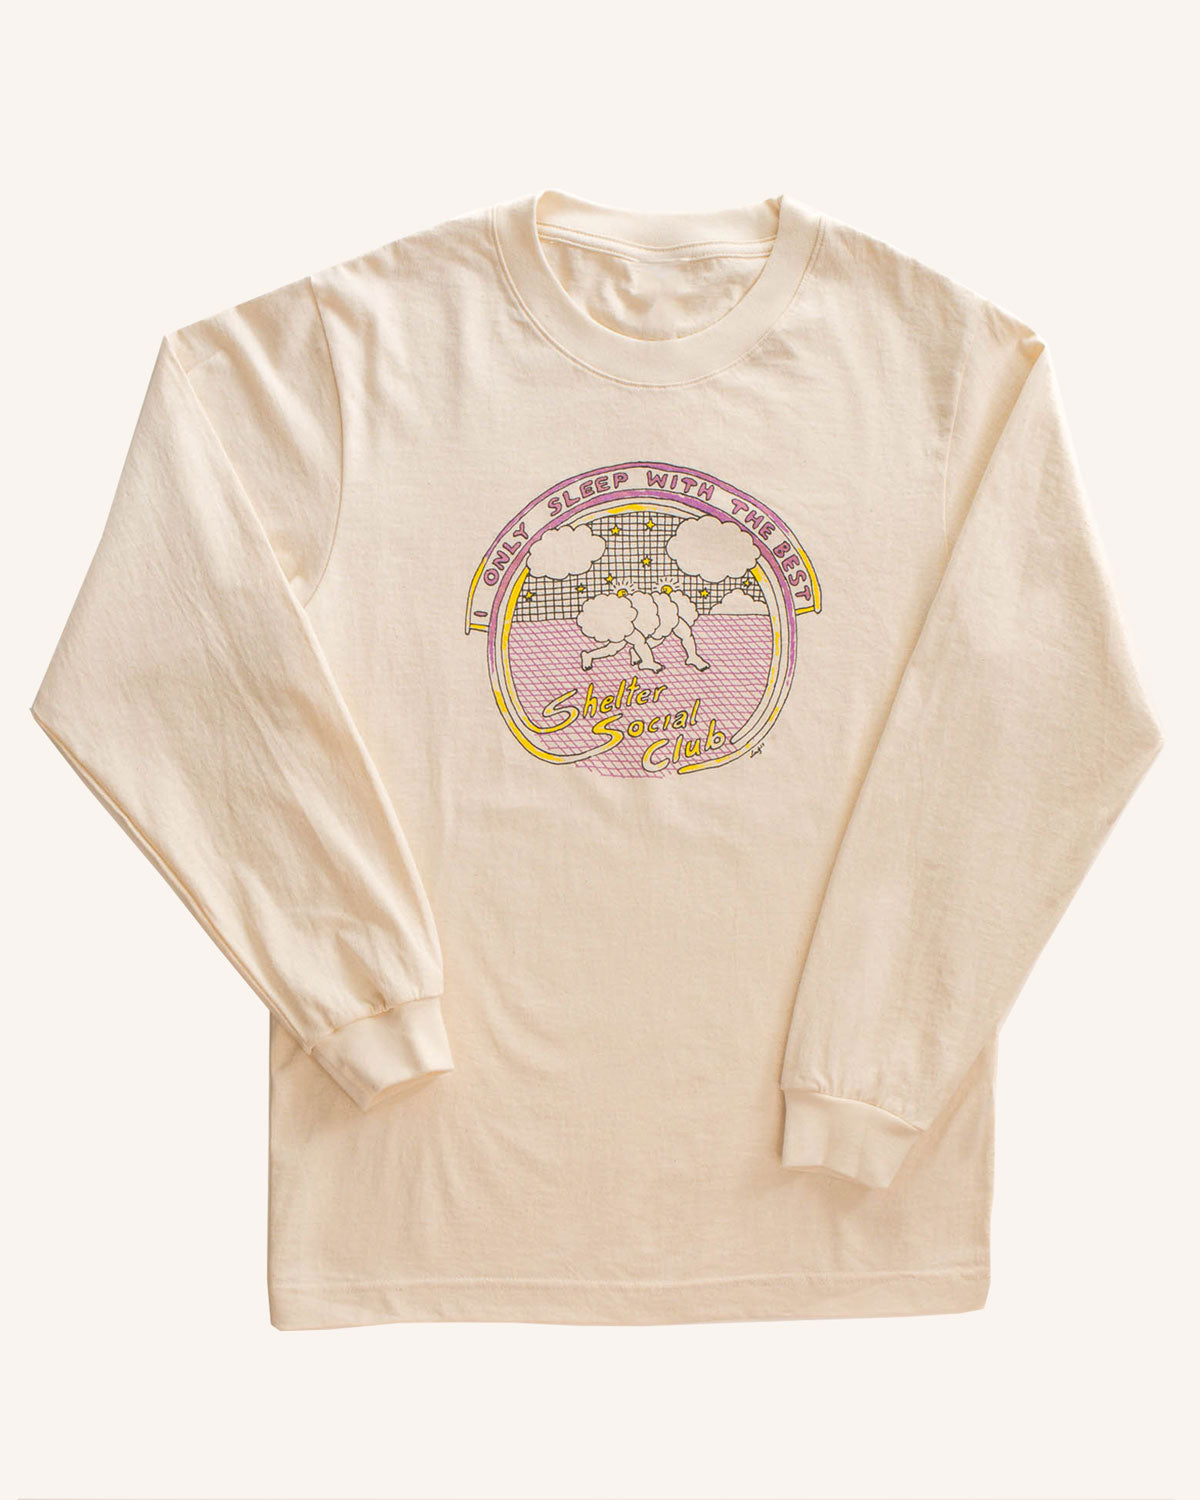 Only Sleep with the Best L/S Tee - Shelter Social Club